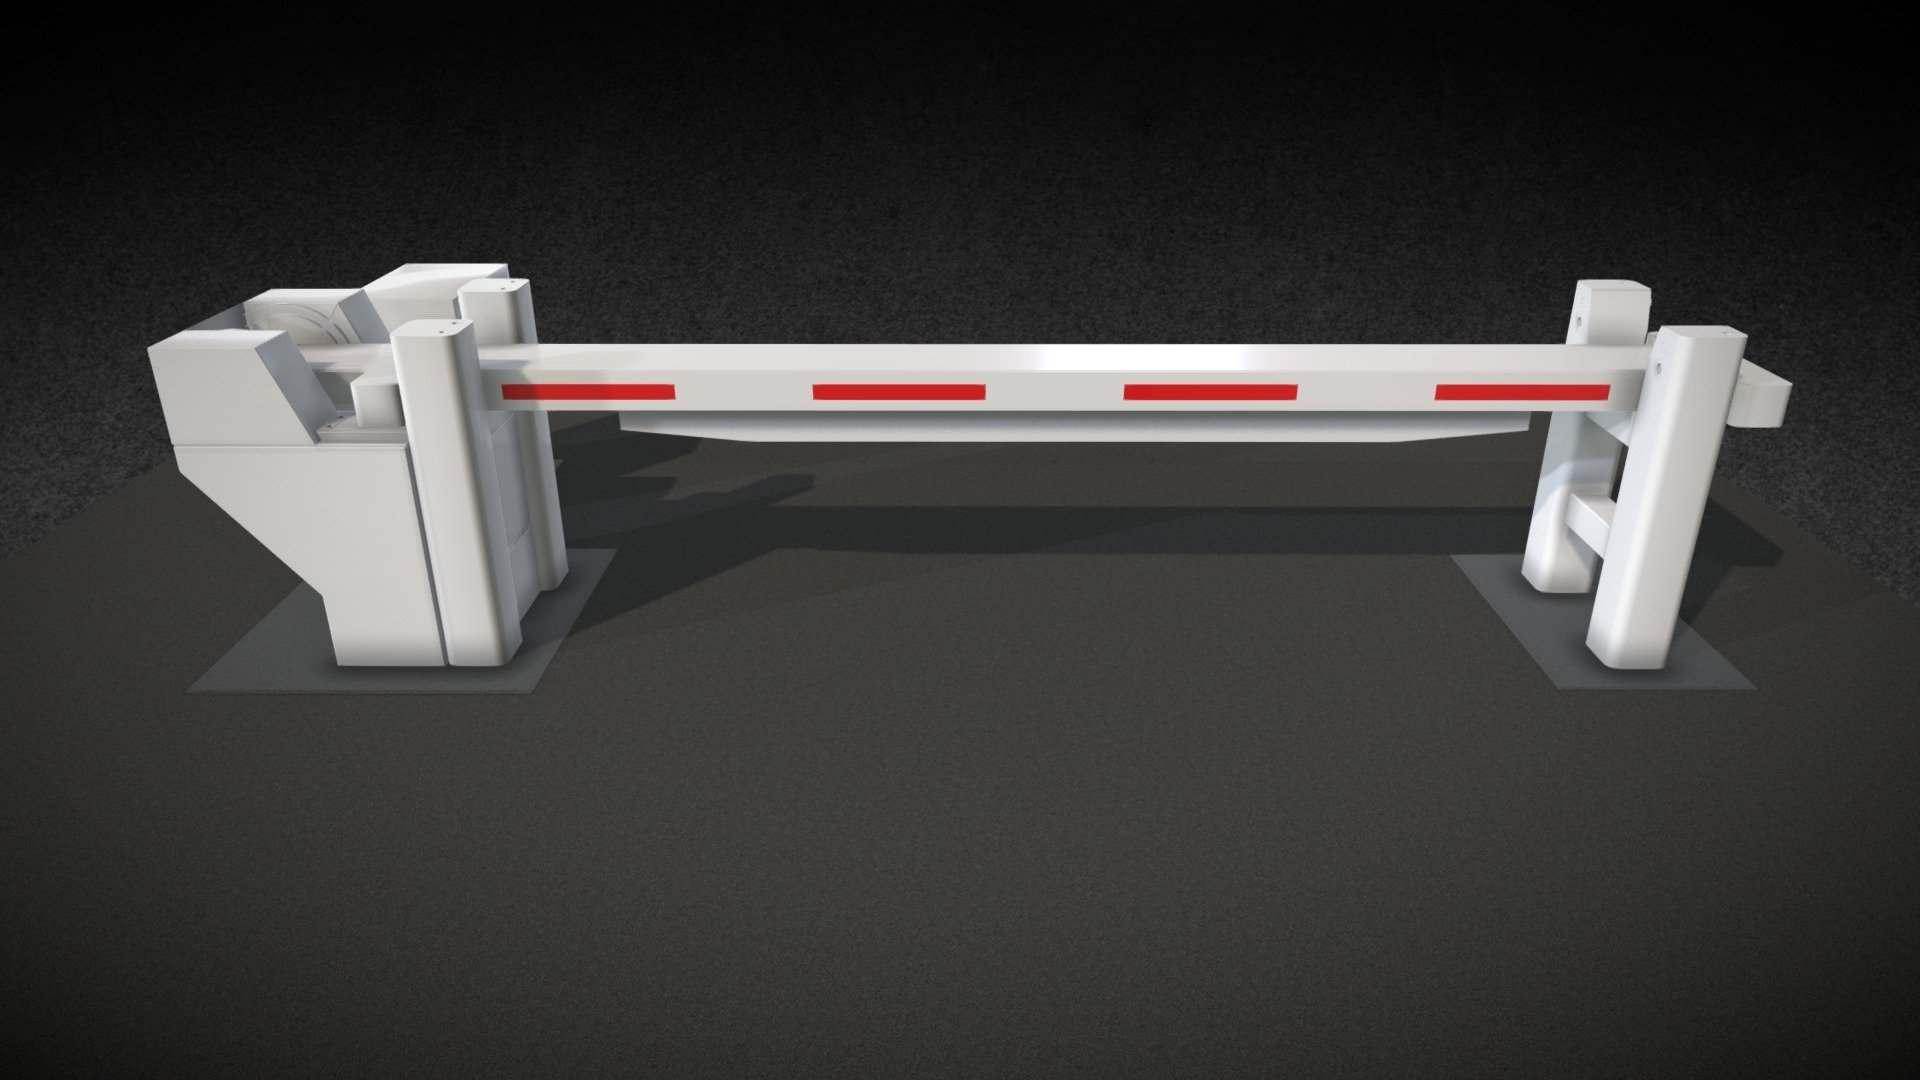 The ULTIMATE PAS 68 automatic drop arm barrier. Successfully impact tested against a range of different energies. The Ultimate Solution.

Successfully impact tested to PAS 68 stopping a 7.5t vehicle travelling at 50mph (80kph). On impact the barrier stopped the vehicle within the aperture.

The beam was retested for with under run skirt to test arresting capability on other vehicles such as saloon car vehicles. The automatic PAS 68 Terra Ultimate Barrier proved that it will stop low &amp; high energy vehicles from entering site.

Industrial hydraulically operated automatic barrier. Designed for easy installation and maintenance.

The automatic Terra Ultimate Barrier can be interfaced to any access control systems.

Maximum width: 4500mm

PAS 68 Tested dimensions:

width 4500mm, crash beam height 1050mm - Frontier Pitts Terra Ultimate Barrier - 3D model by Frontier Pitts Ltd. (@frontierpitts) 3d model